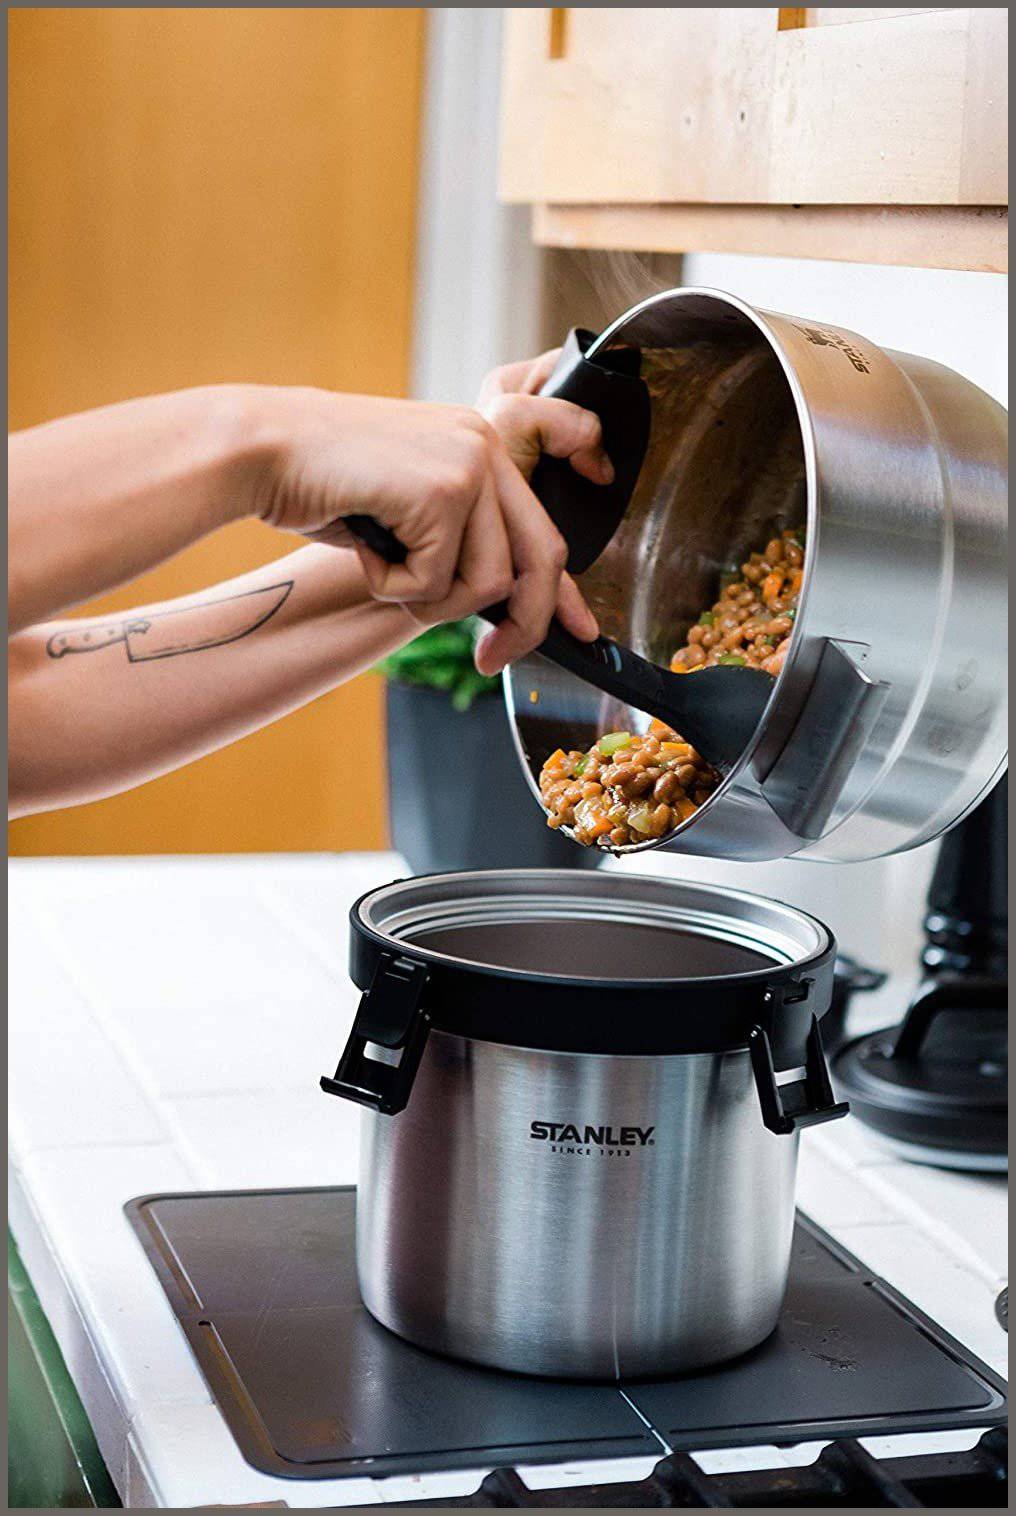 https://babylovesupplies.com.au/cdn/shop/products/babylove-supplies-stanley-adventure-stay-hot-3qt-camp-crock-vacuum-insulated-stainless-steel-pot-27037648978071_1024x1024@2x.jpg?v=1616122736